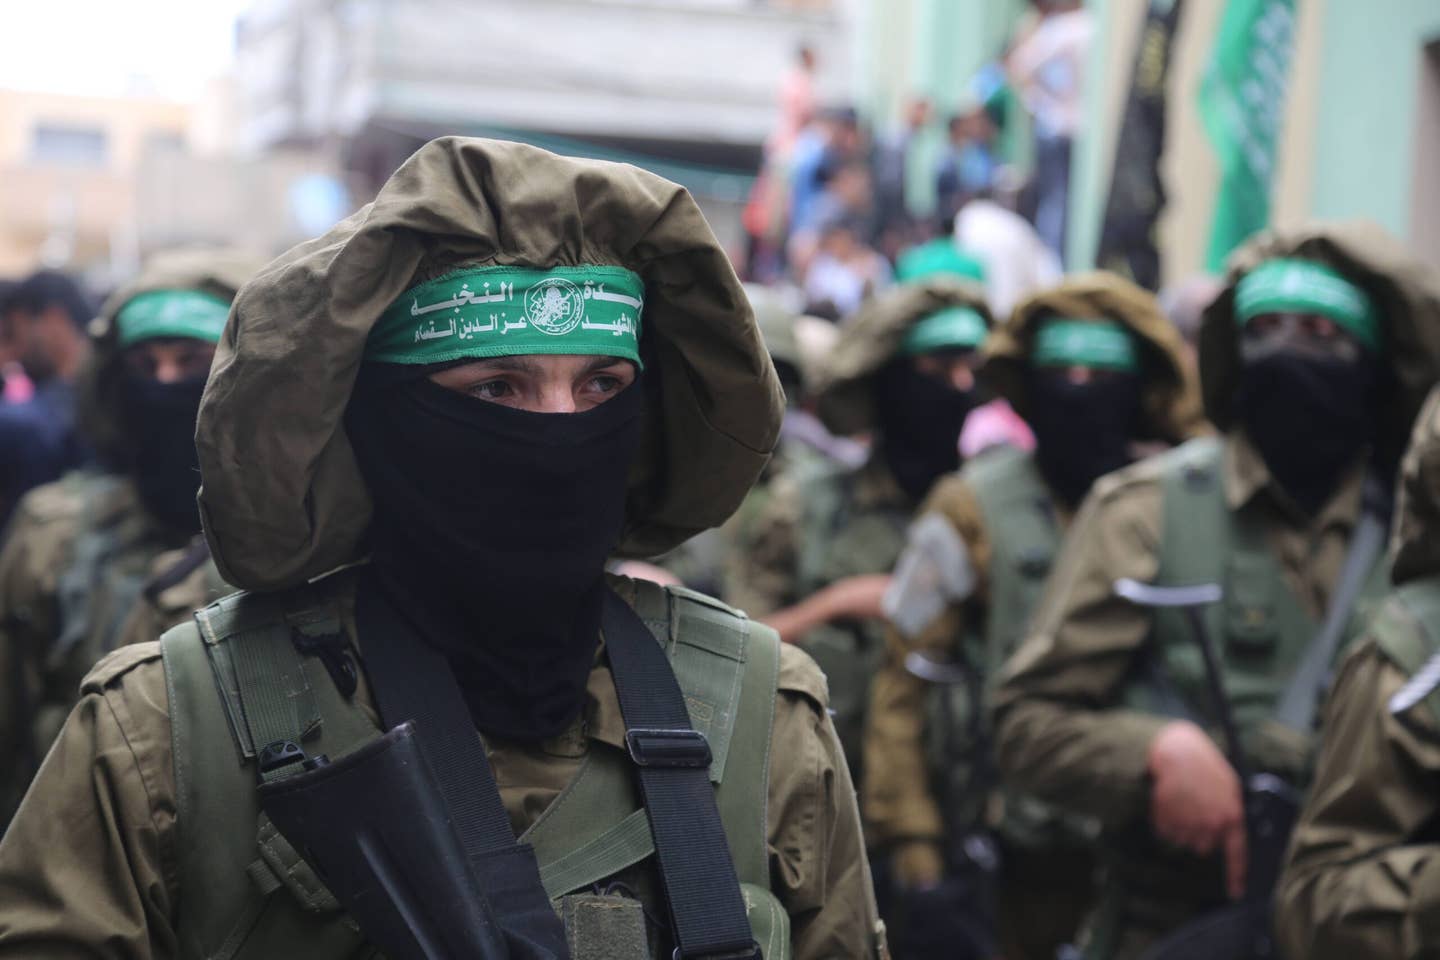 Members of the Islamist movement Hamas' military wing Al-Qassam Brigades during the funeral of six of their comrades who were killed in an unexplained explosion the night before, in Deir al-Balah in the central Gaza strip on May 6, 2018. <em>Photo by Majdi Fathi/NurPhoto</em>